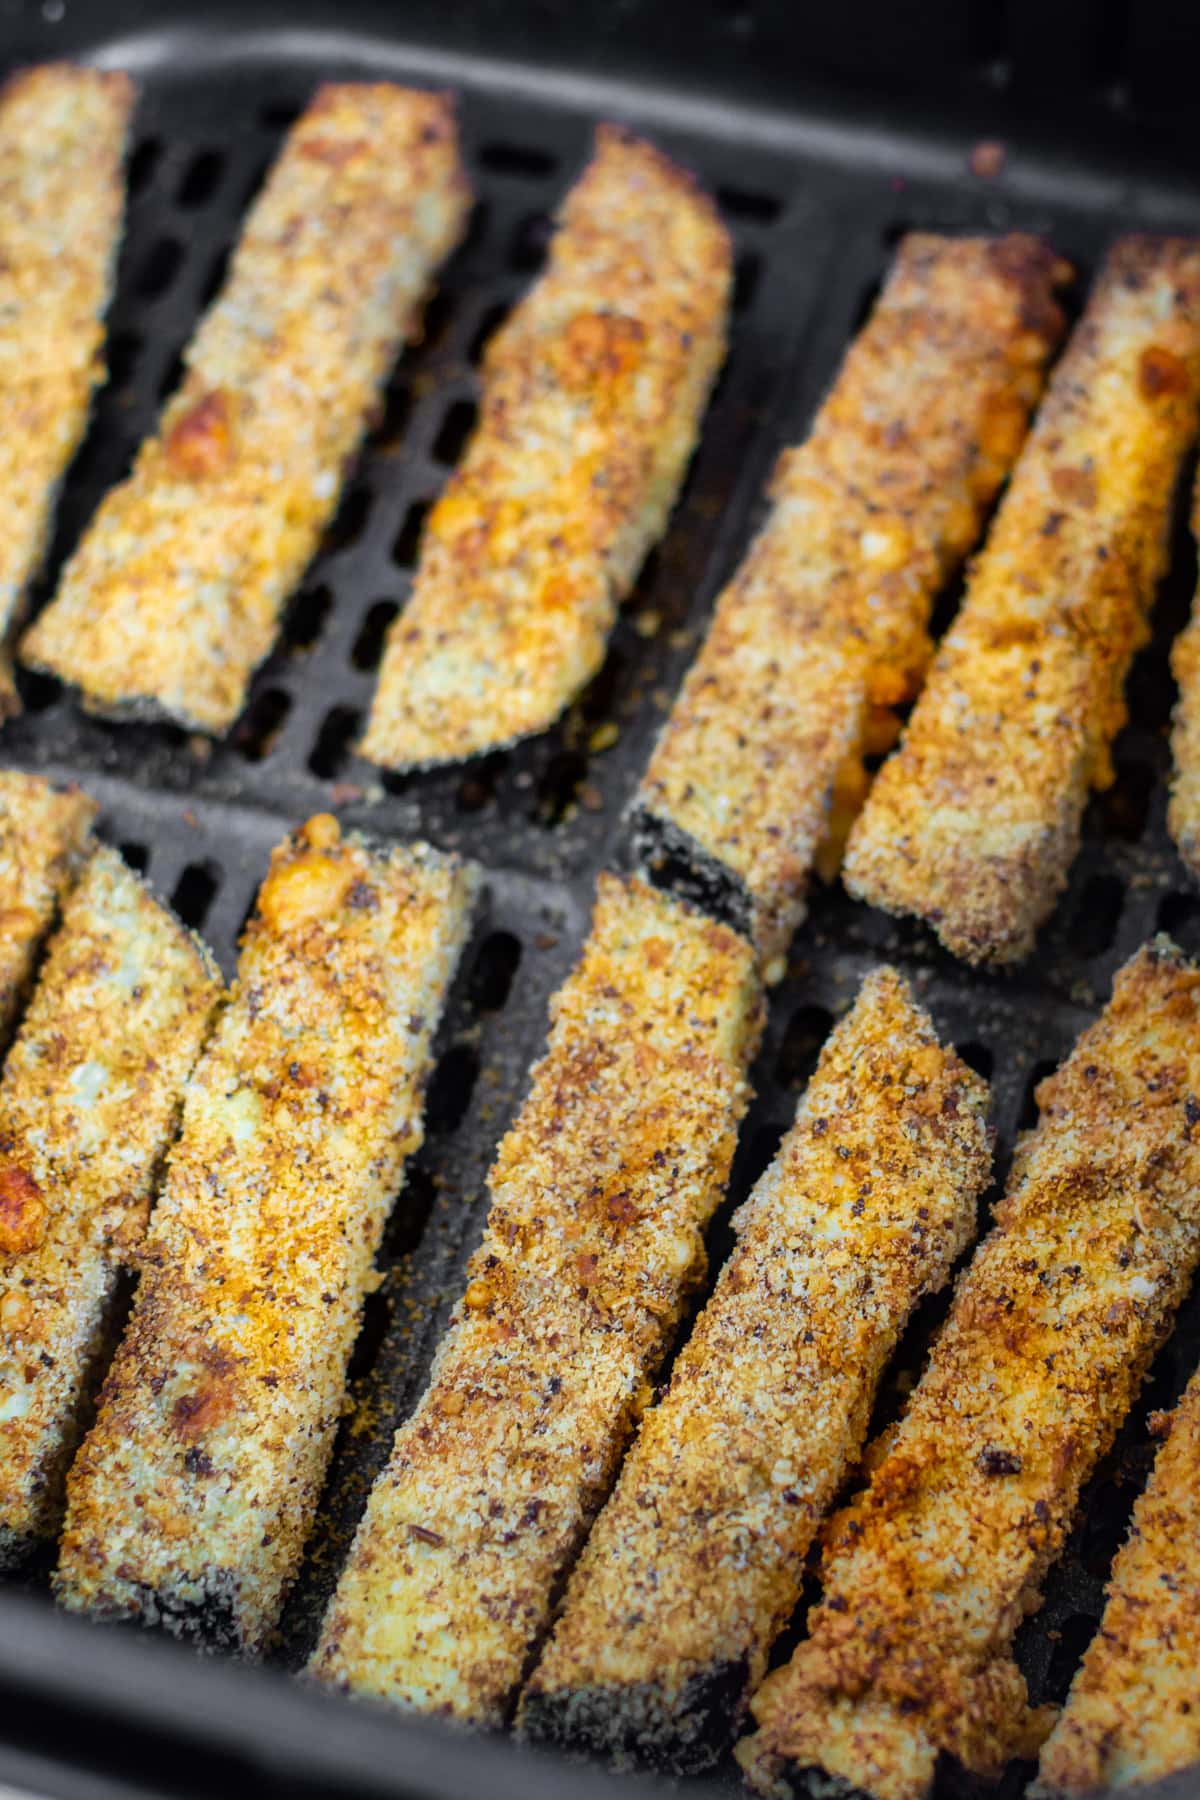 Macro view of eggplant fries with bread crust.